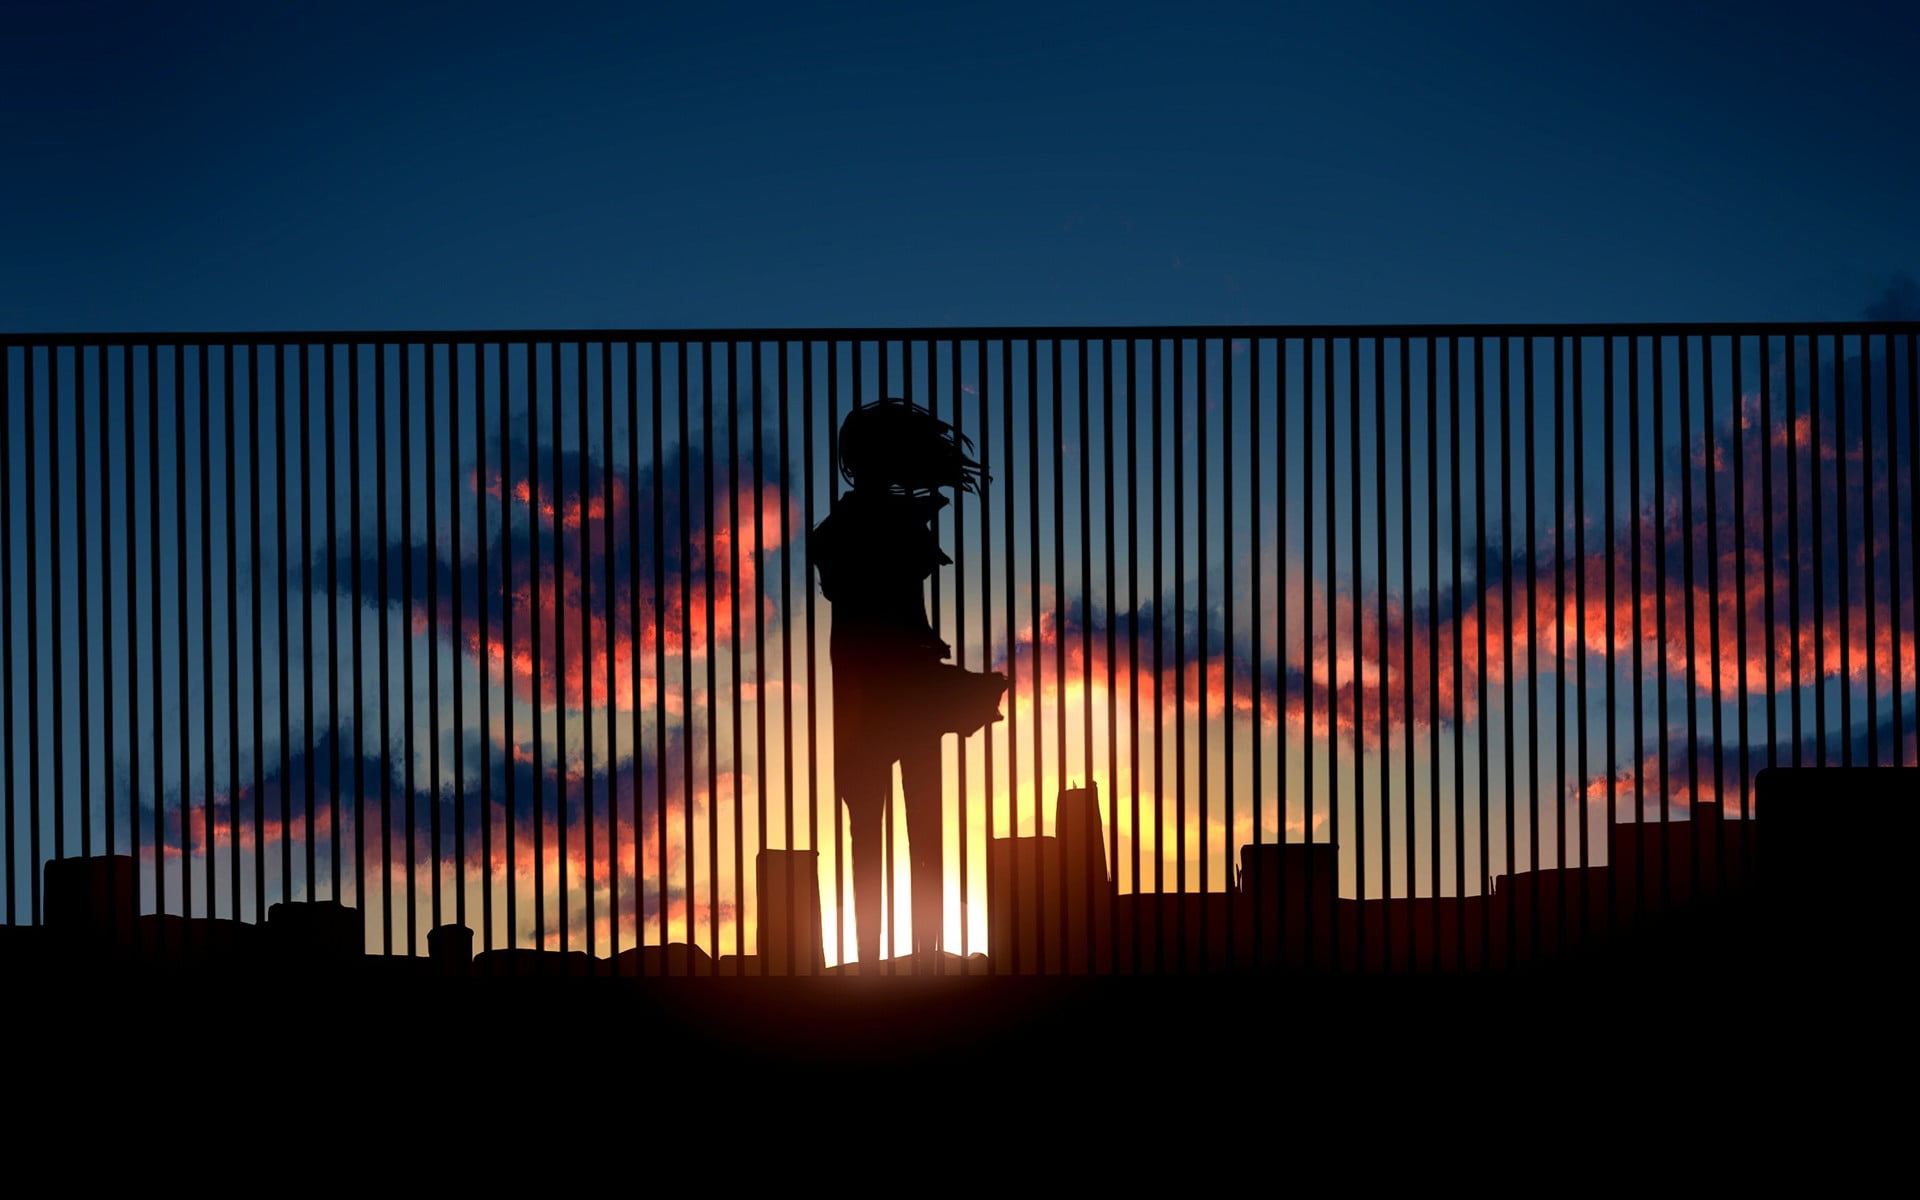 woman standing silhouette, silhouette of woman near fence, anime